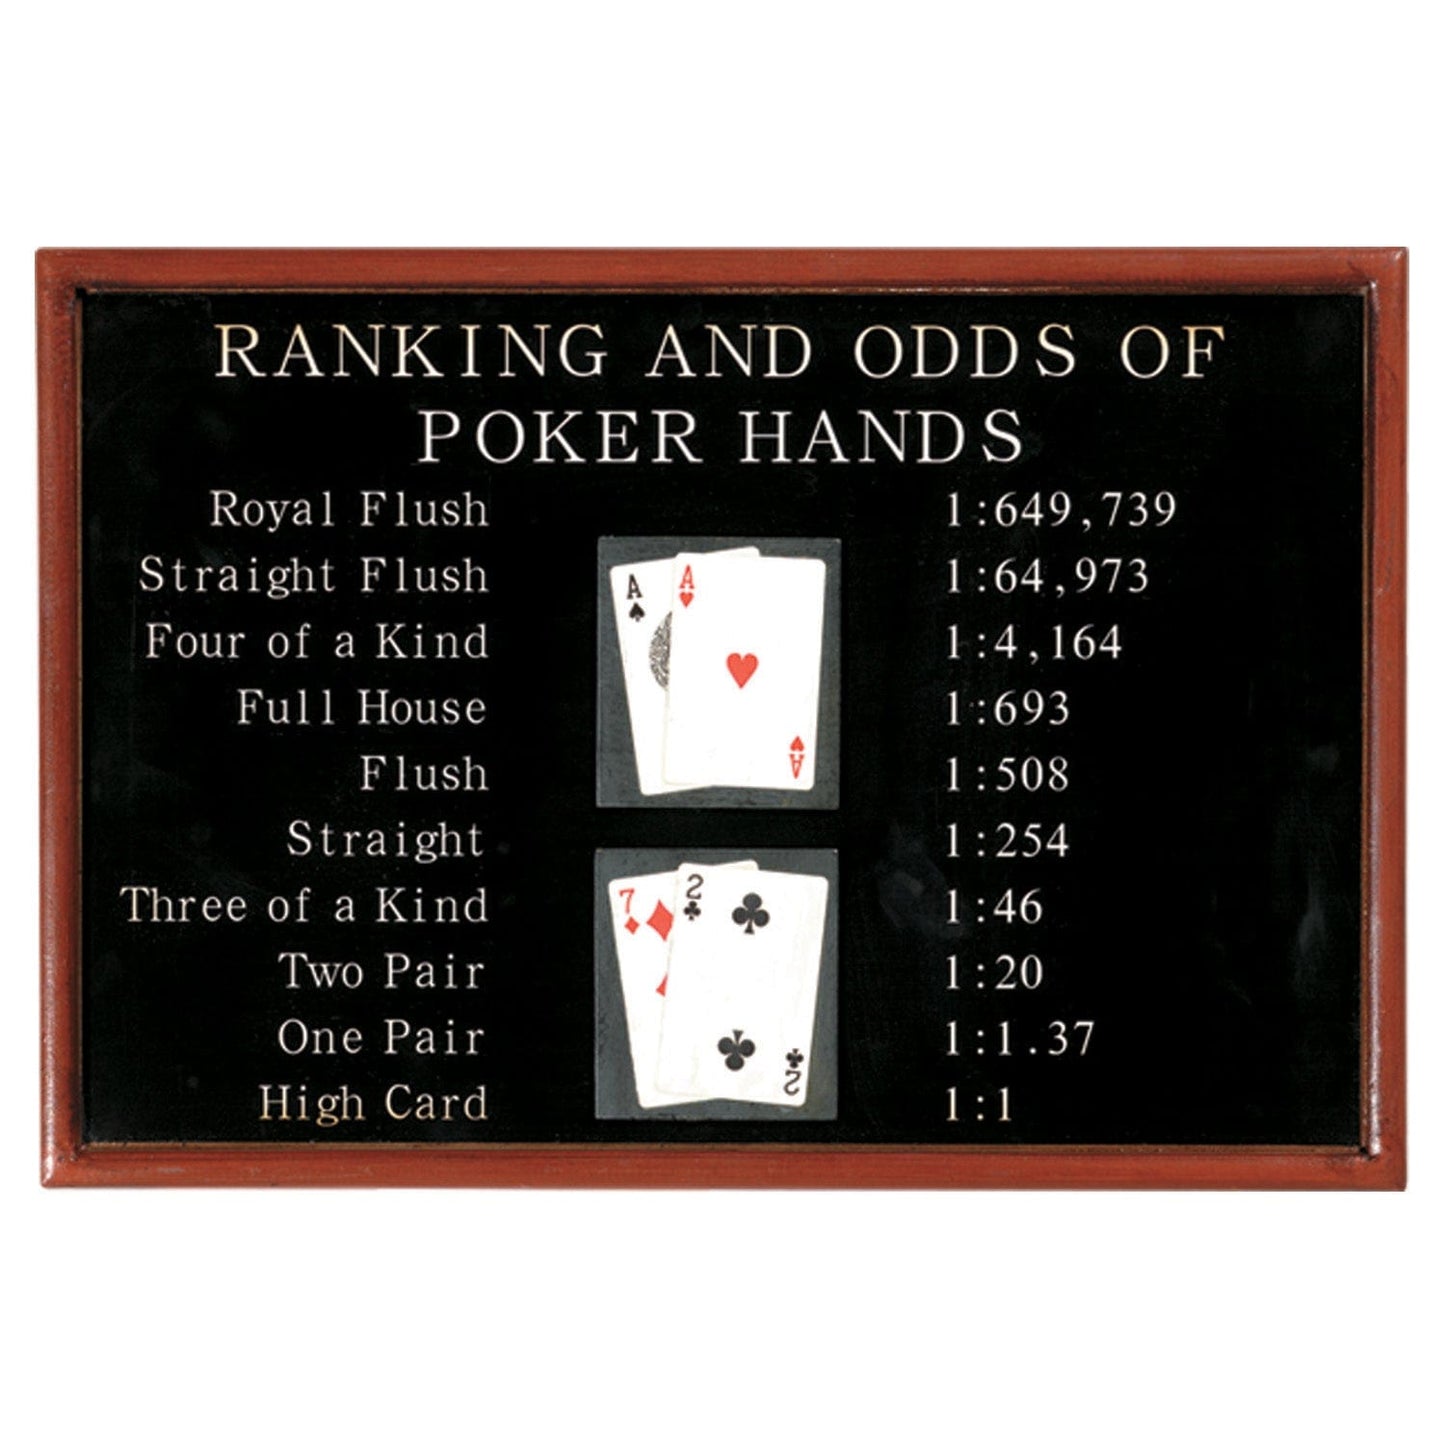 RAM Game Room Ram Game Room Pub Sign-Poker Ranking And Odds